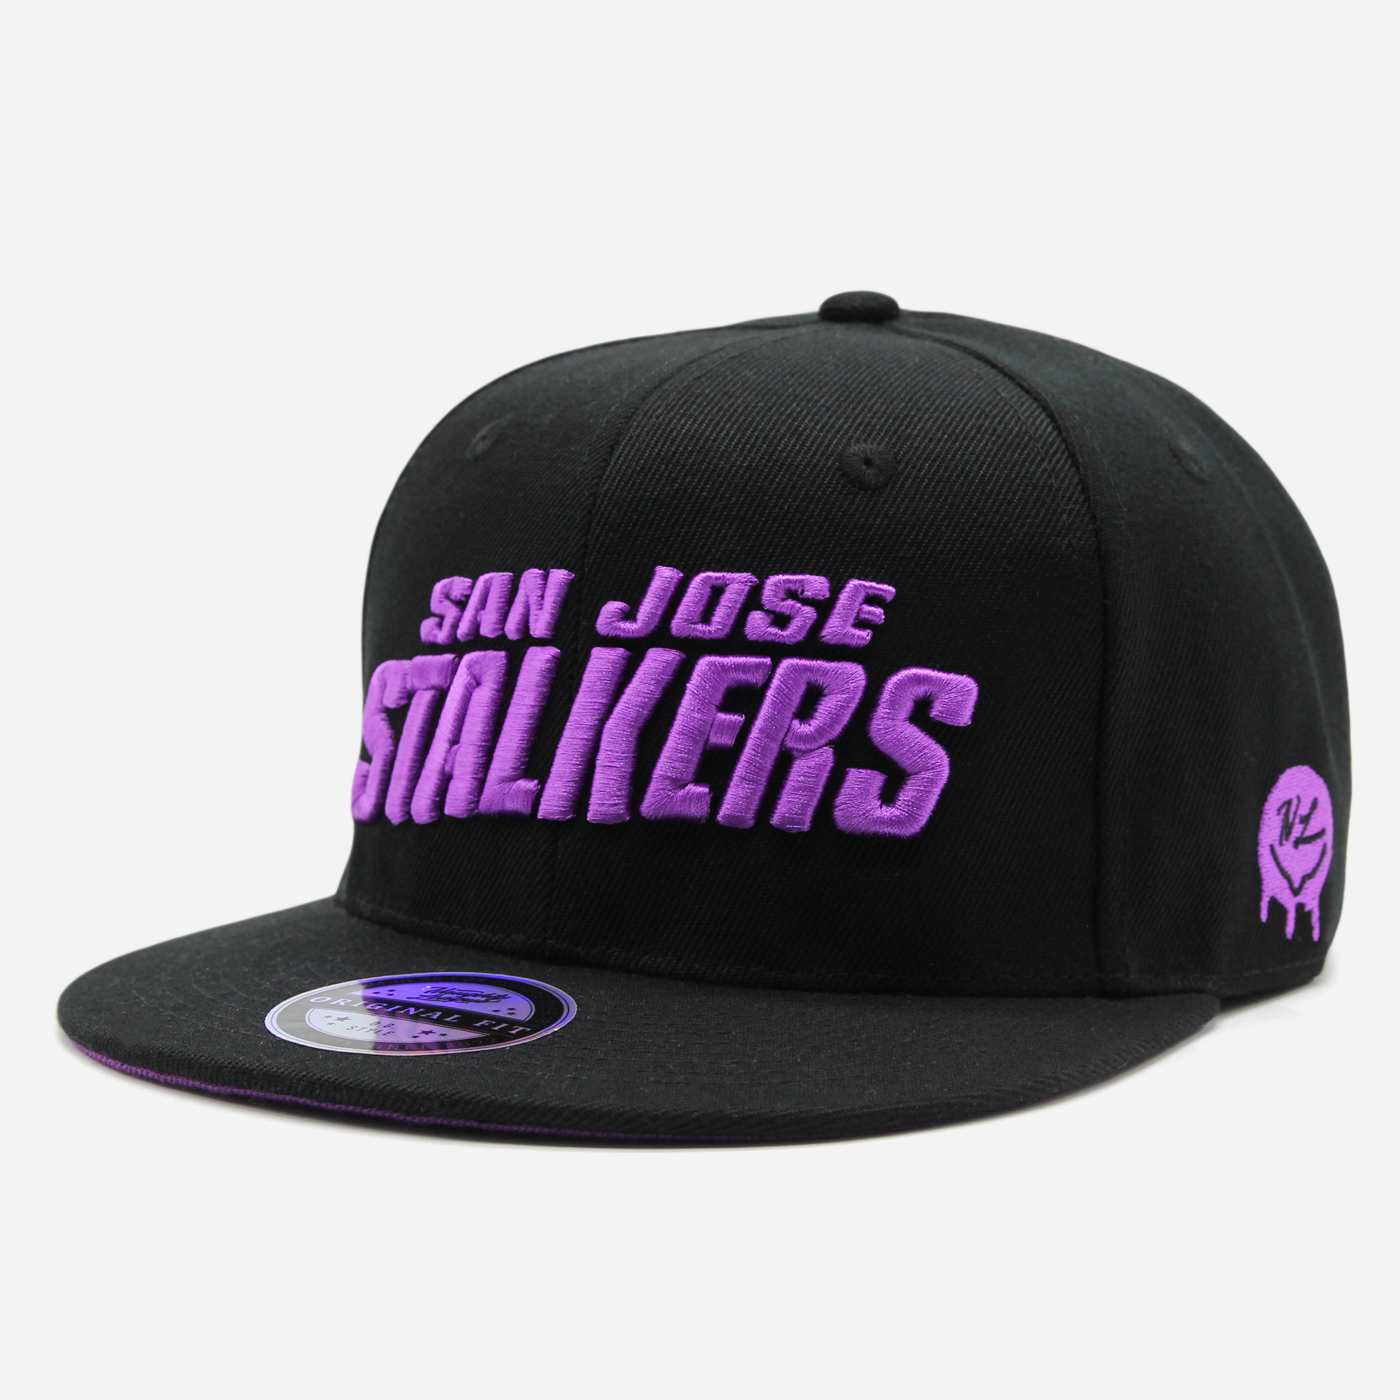 San Jose Stalkers Text Logo fitted black